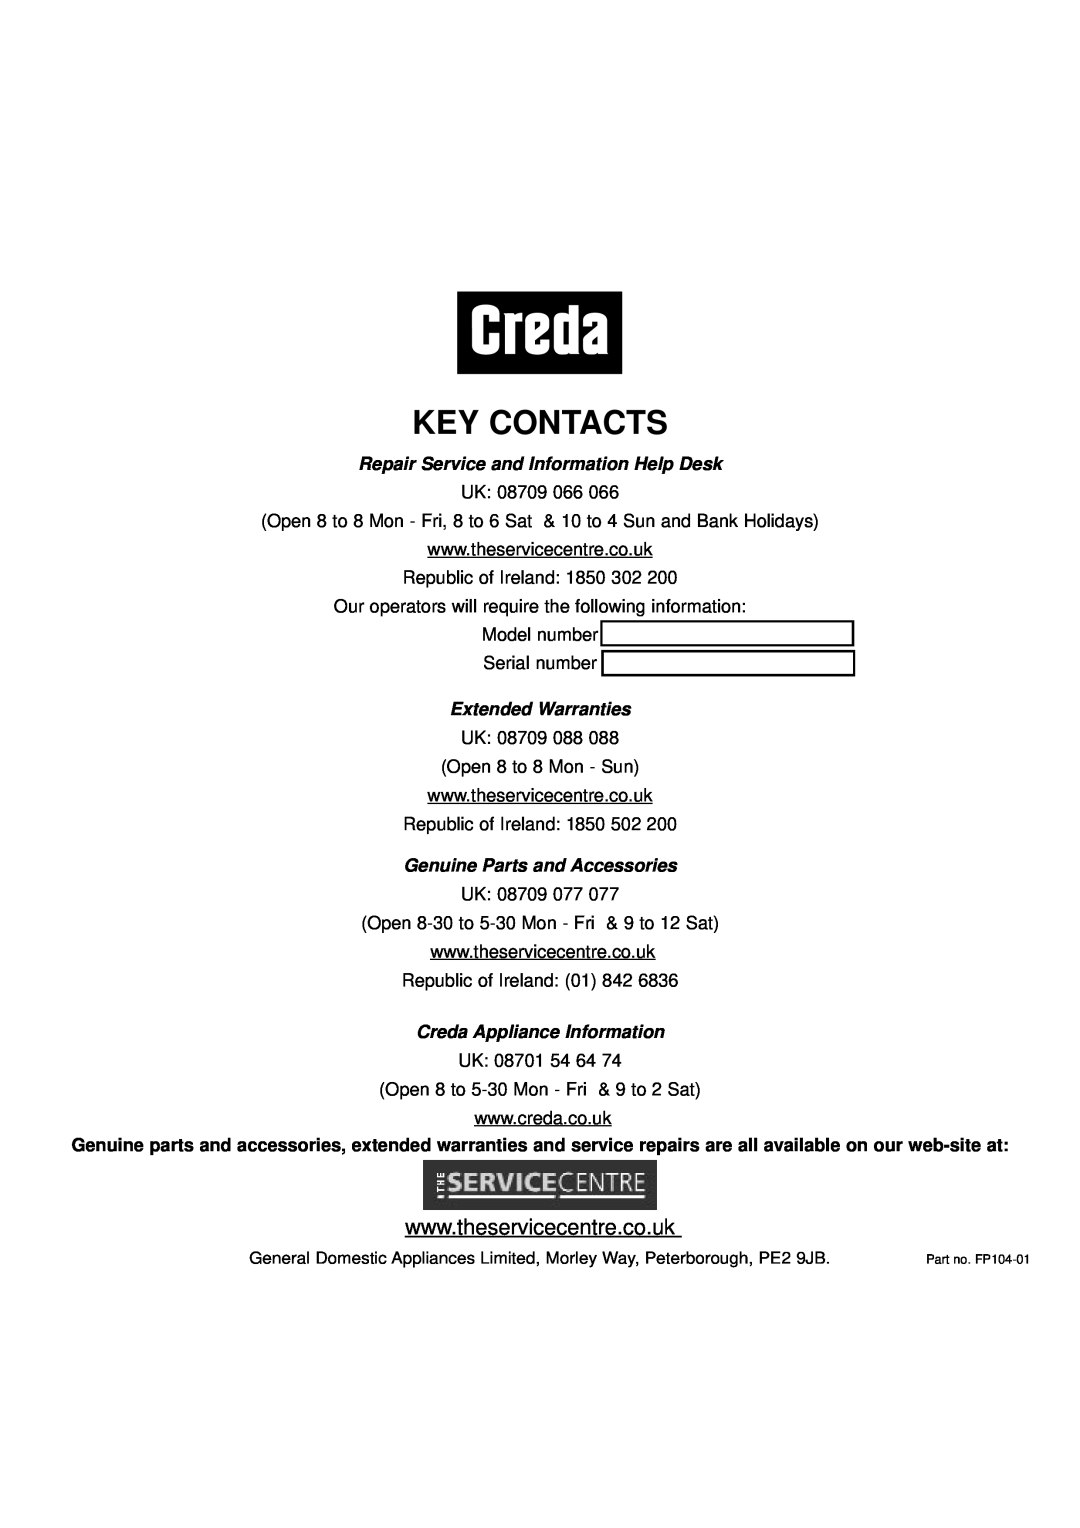 Creda MBO55 manual Key Contacts, Creda Appliance Information, Repair Service and Information Help Desk, Extended Warranties 